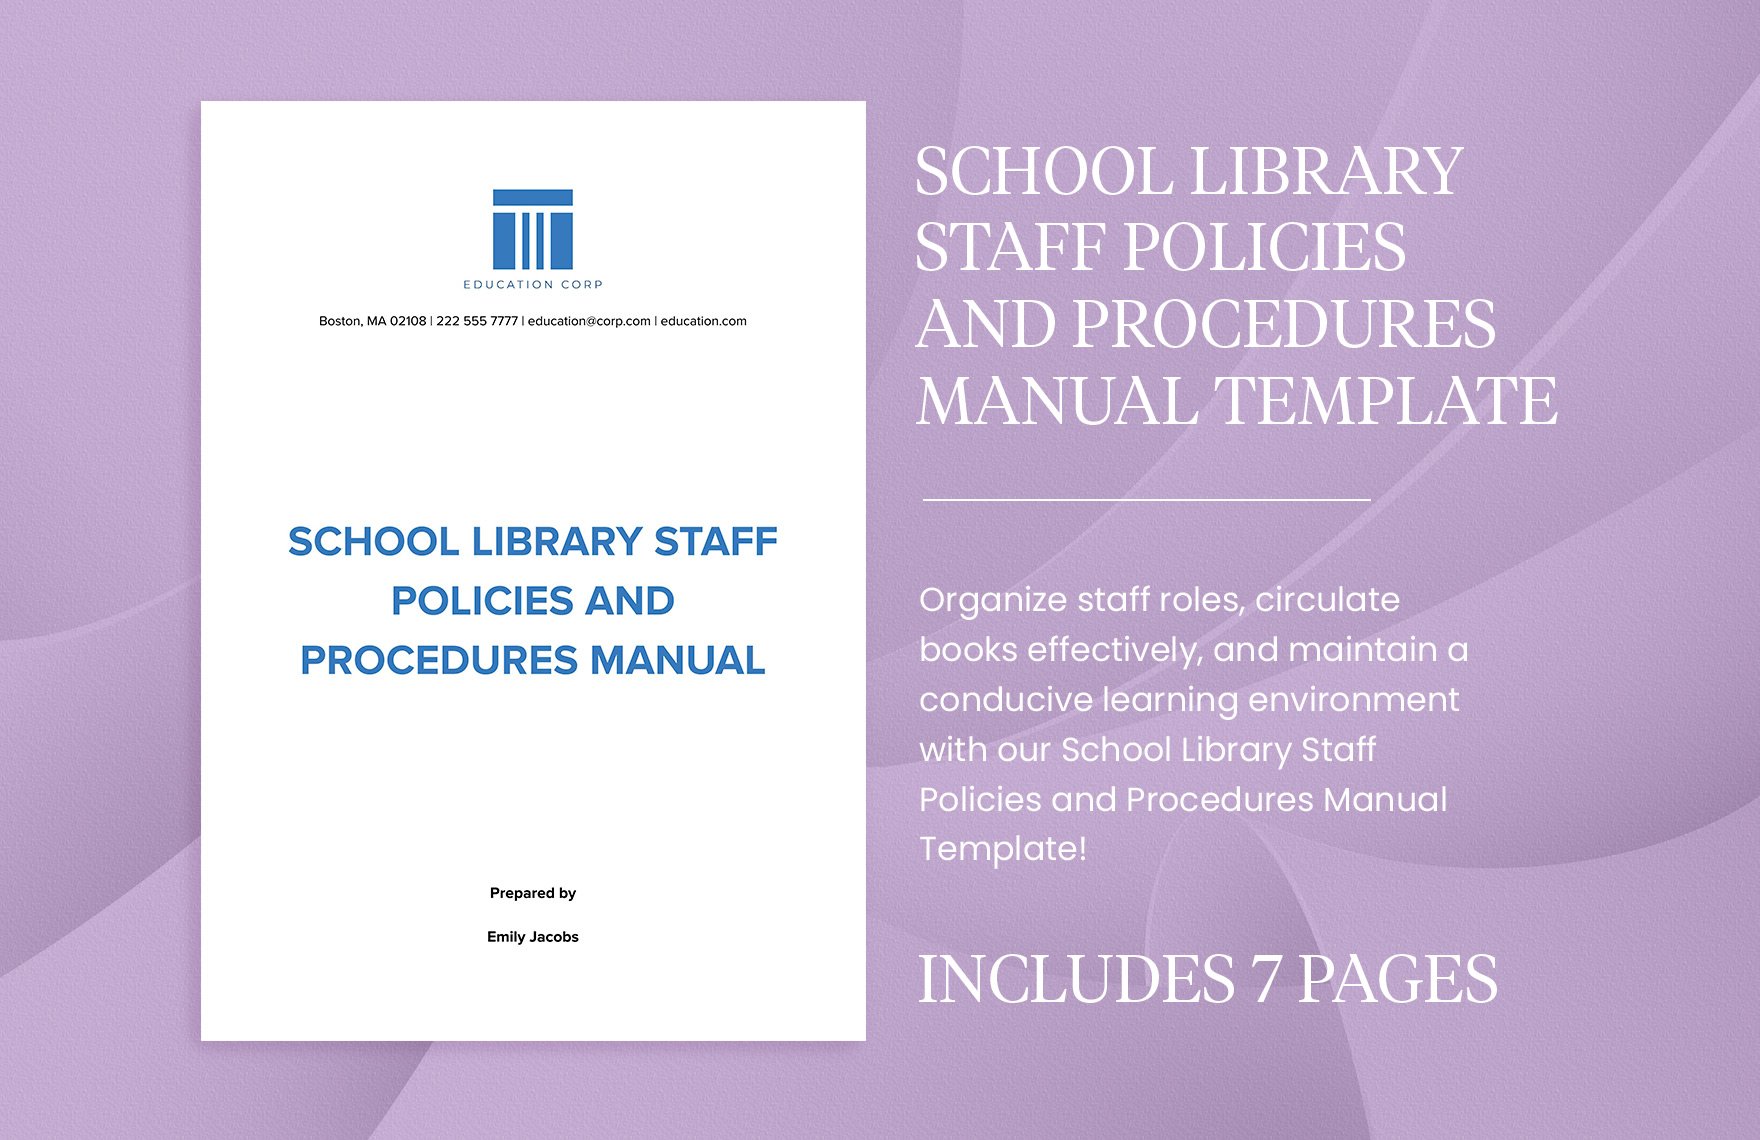 School Library Staff Policies and Procedures Manual Template